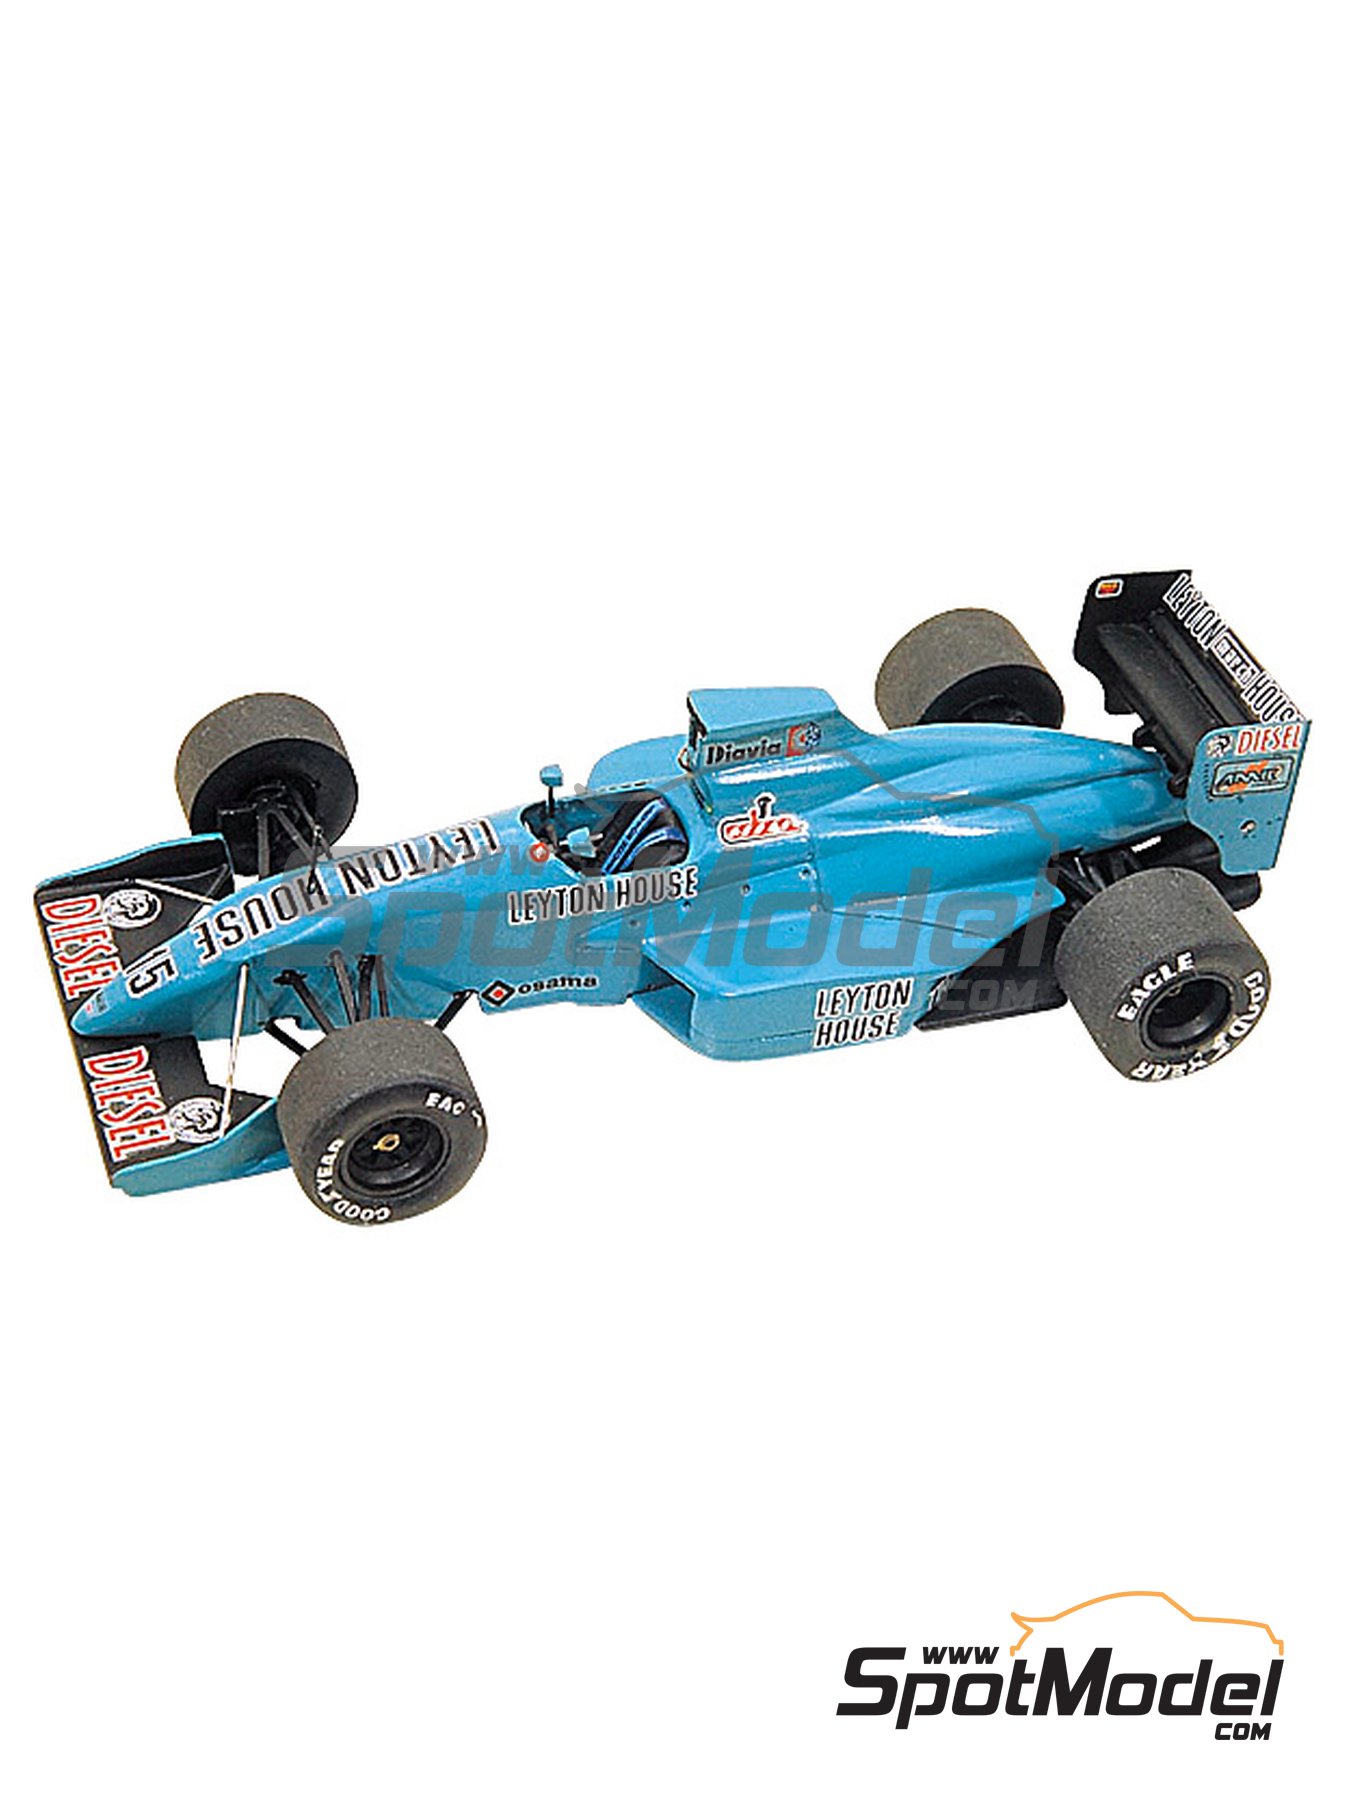 March Judd 881 Leyton House Racing Team - San Marino Formula 1 Grand Prix  1988. Car scale model kit in 1/43 scale manufactured by Tameo Kits (ref. TMK